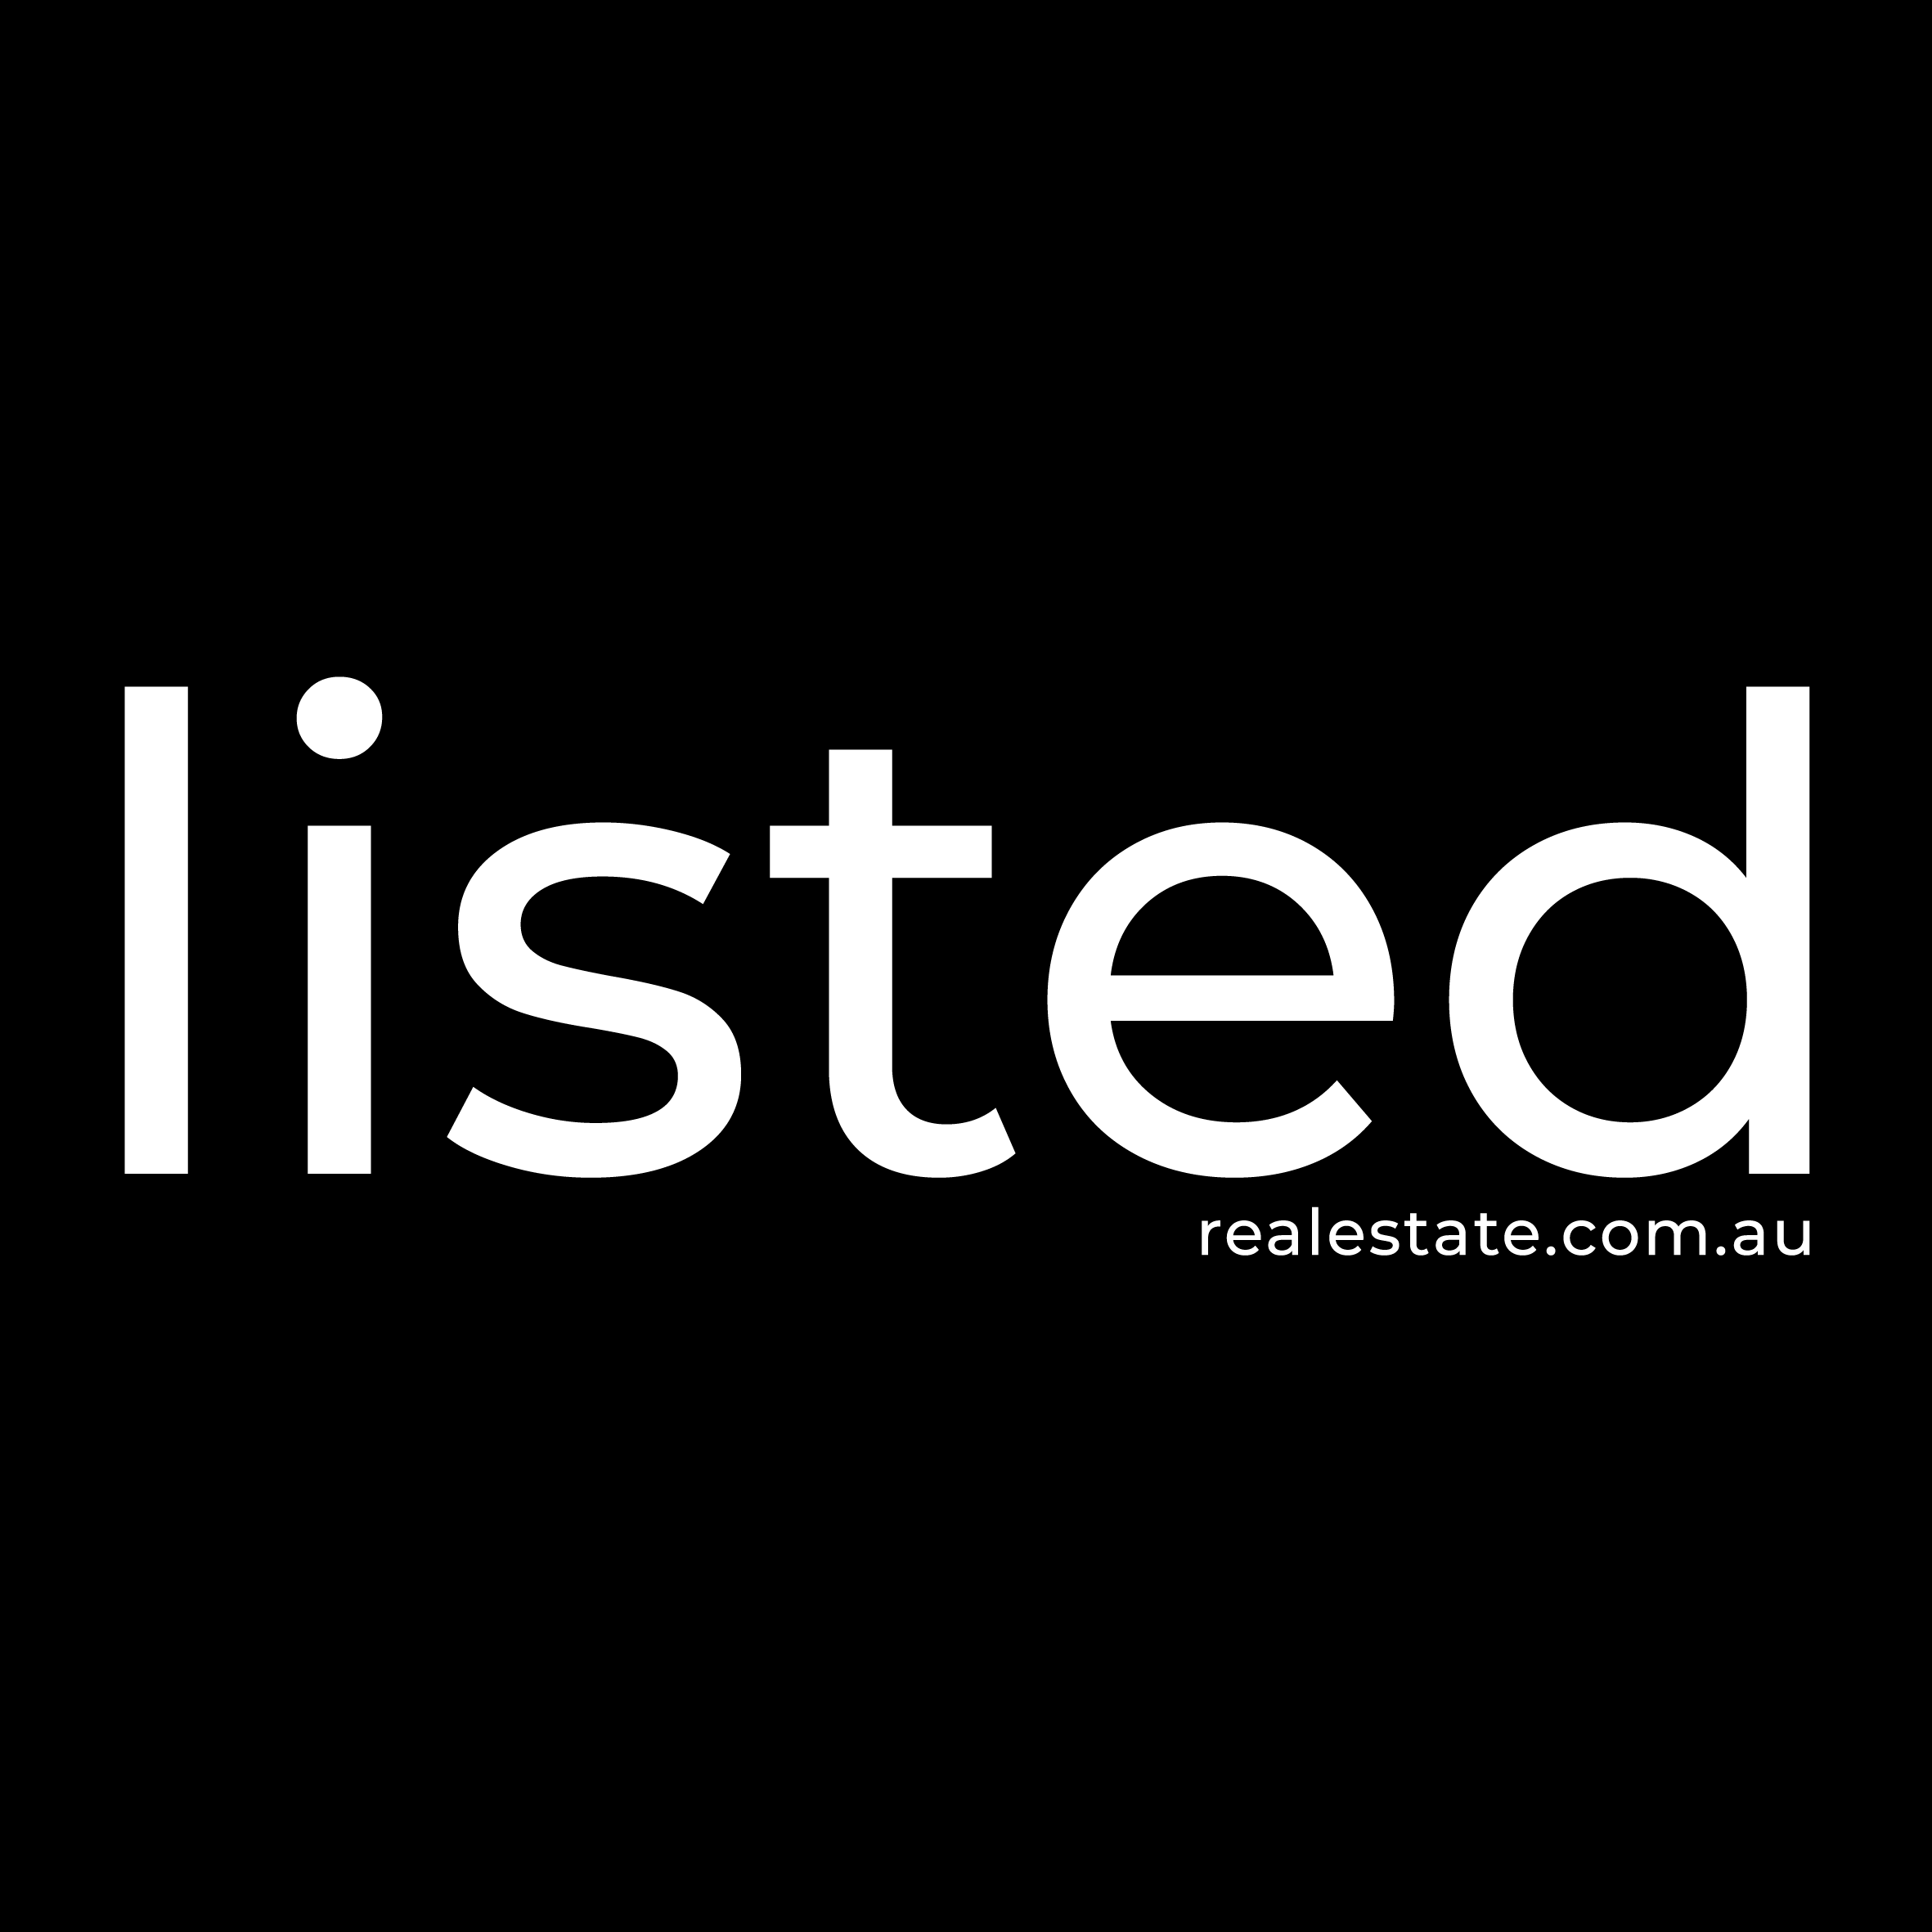 Listed Real Estate